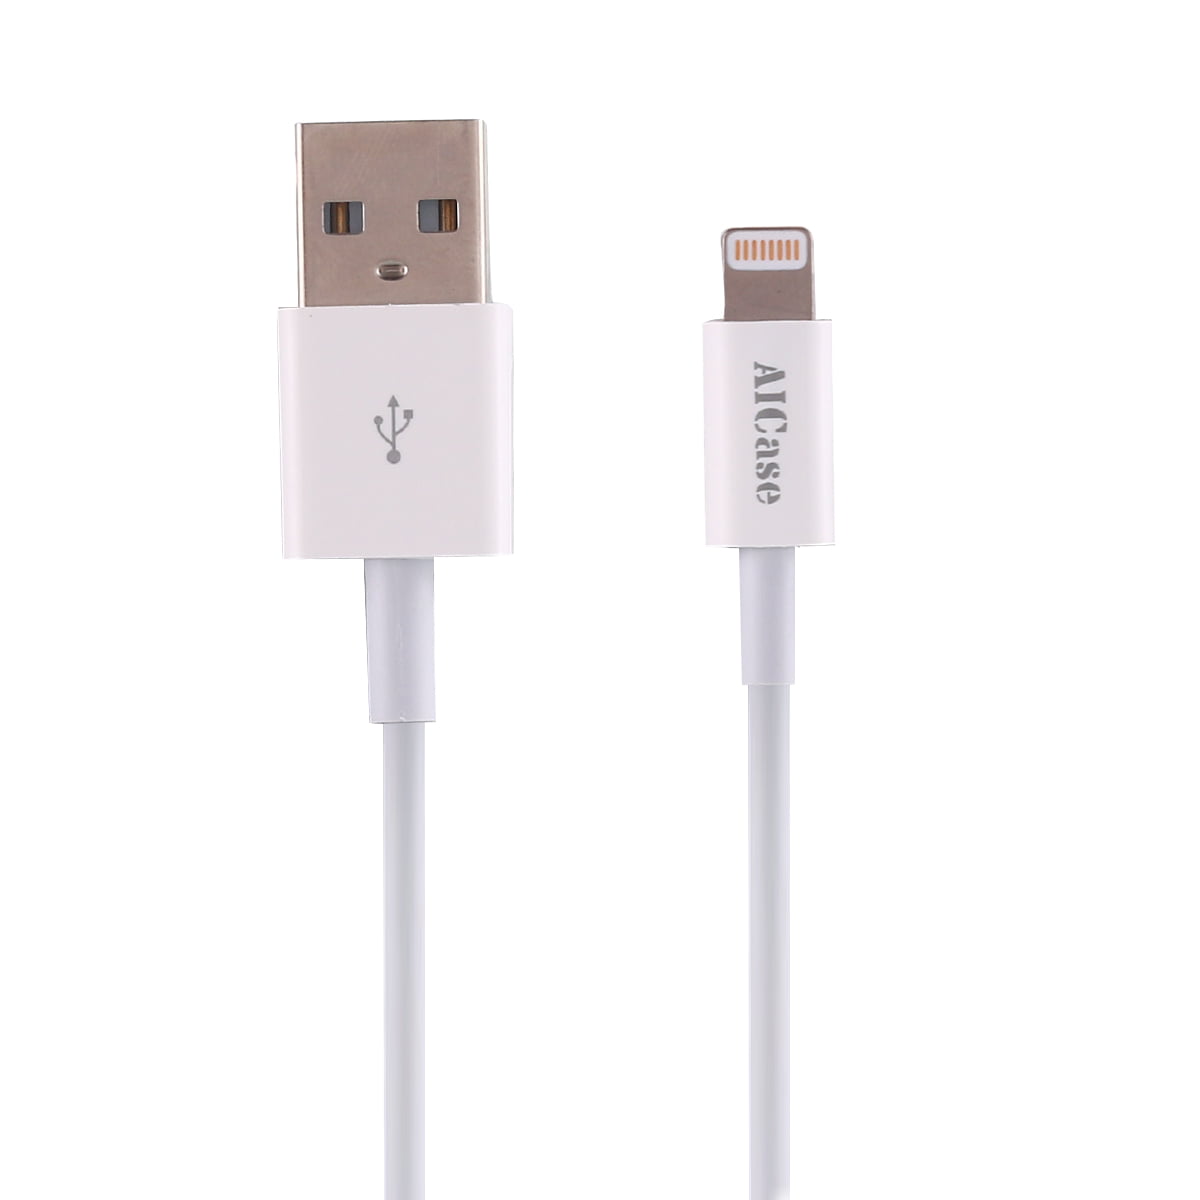 2IN1 2M IPHONE LIGHTNING CHARGEUR CHARGER CHARGING CABLE IPHONE 5 6 7 8 X IPAD 